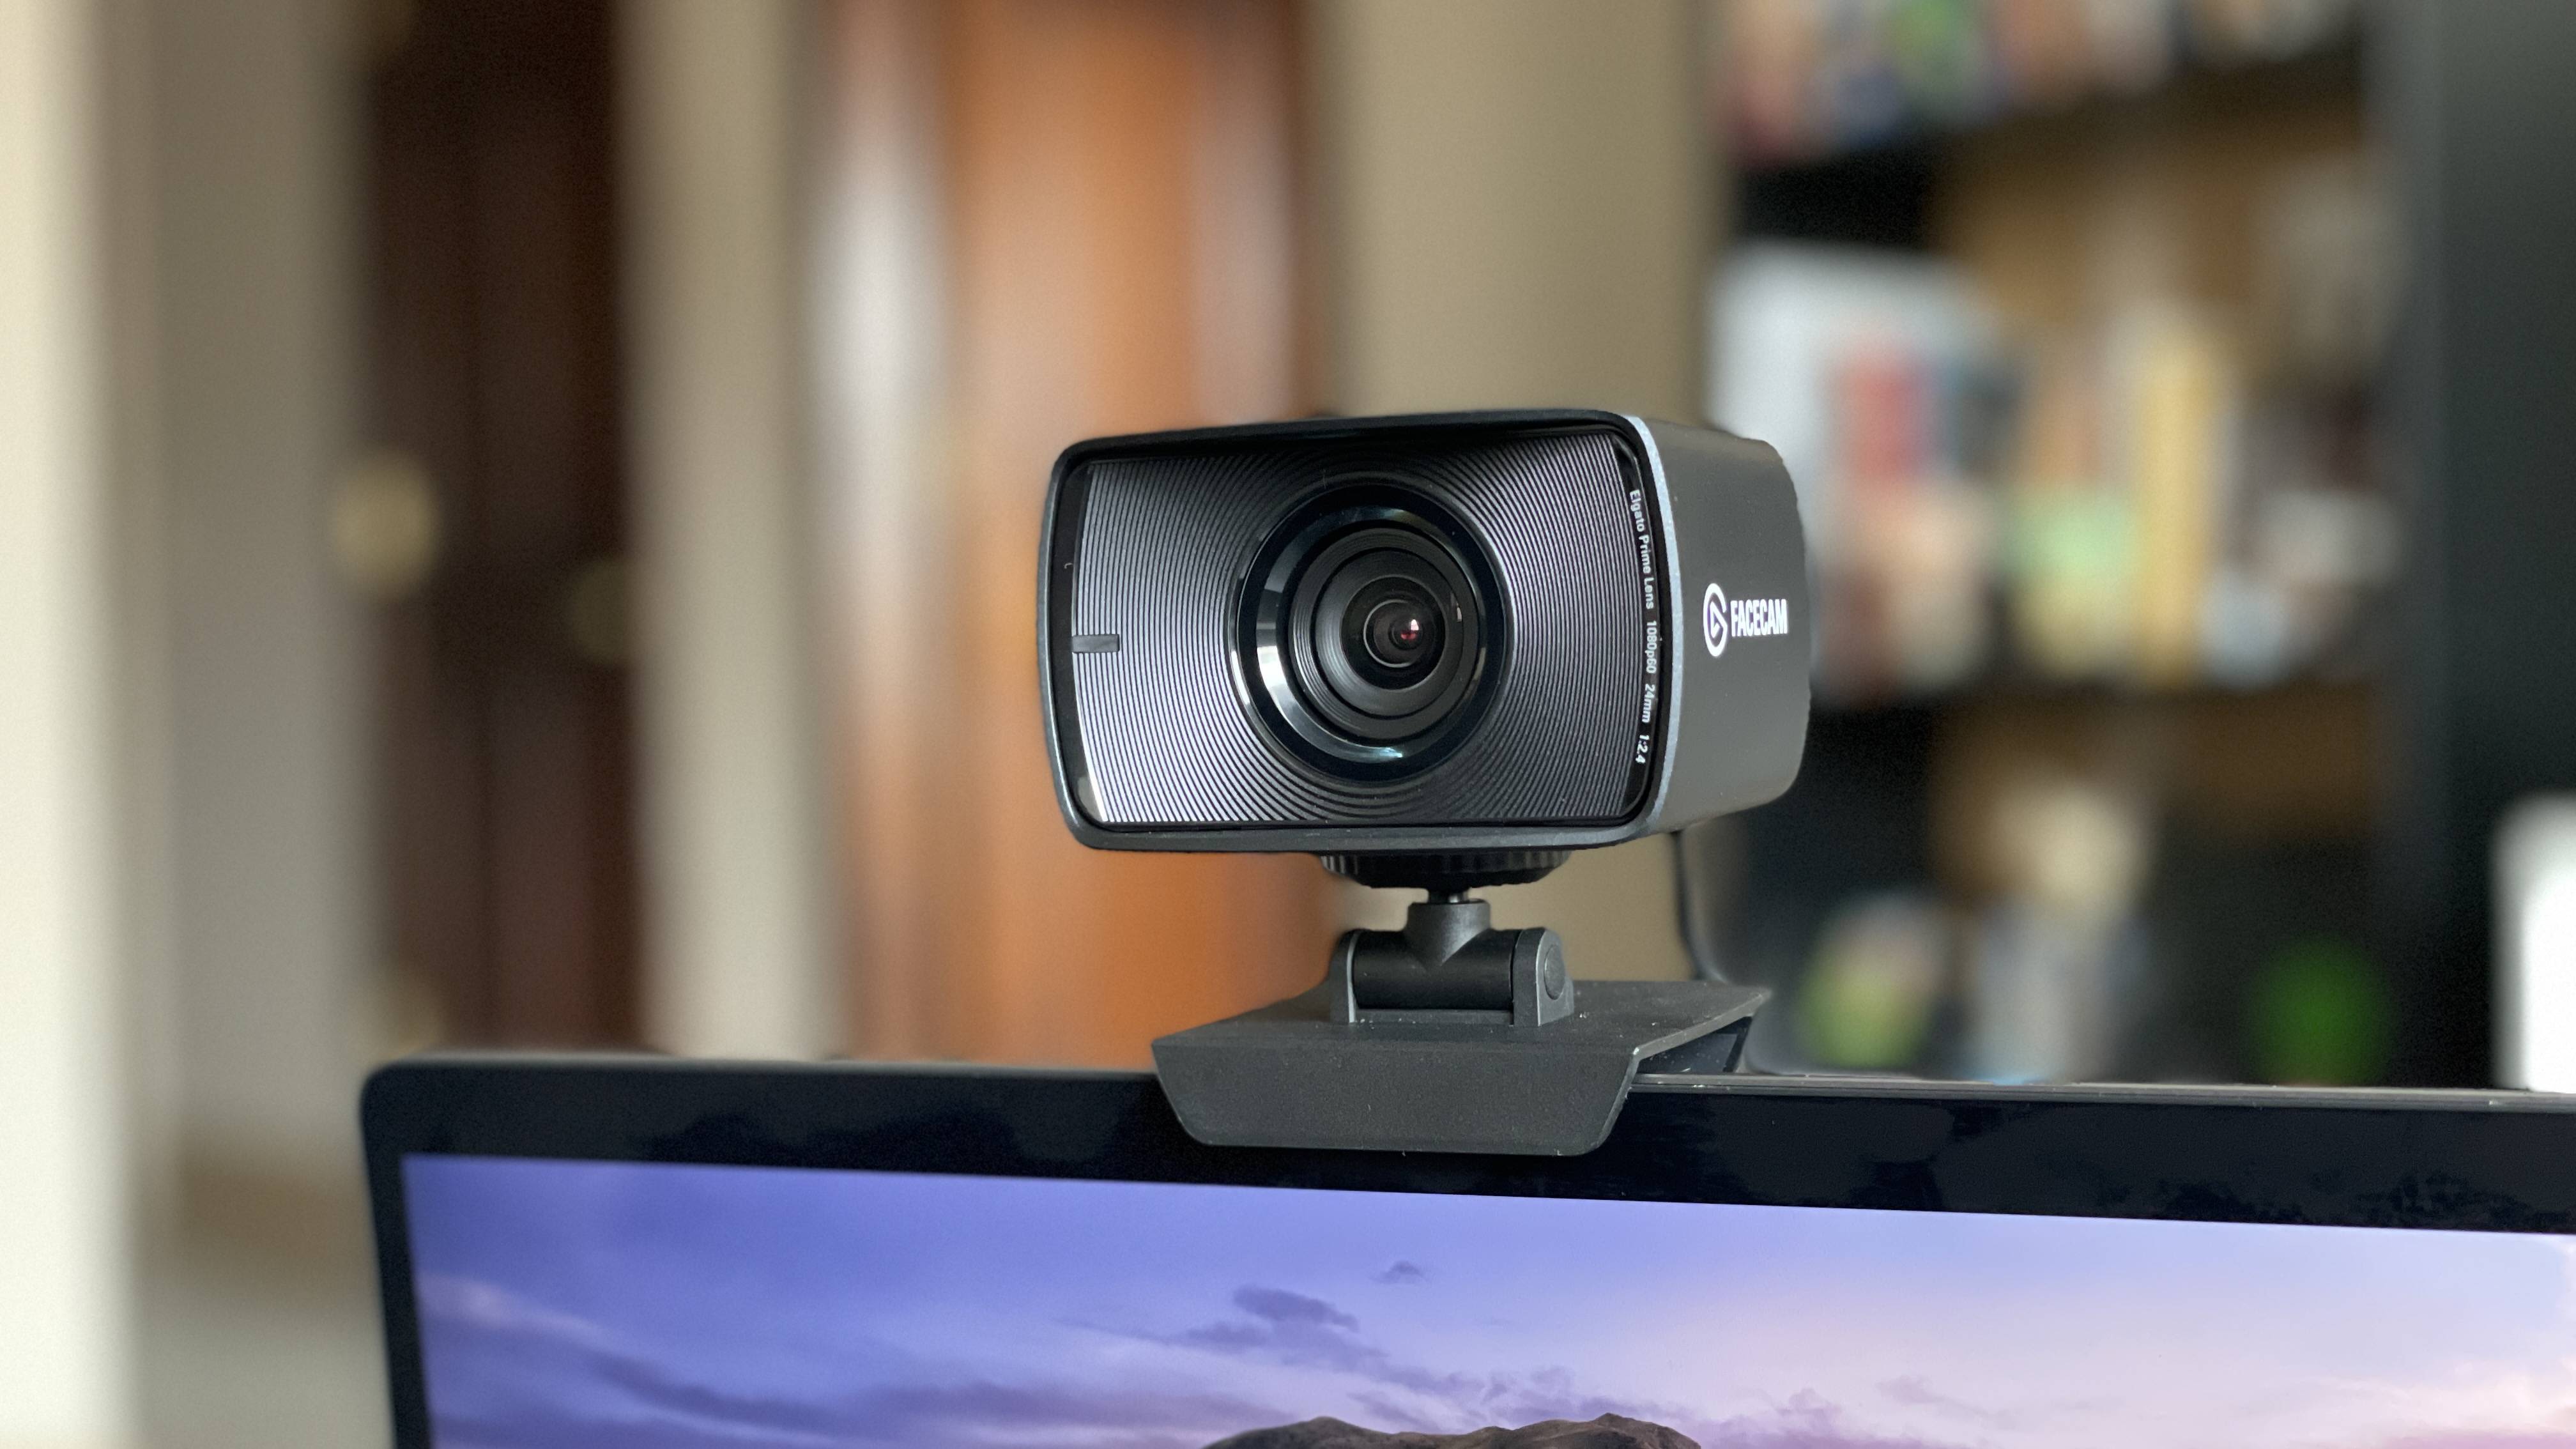 Elgato's Facecam Pro is awesome for various reasons - review and